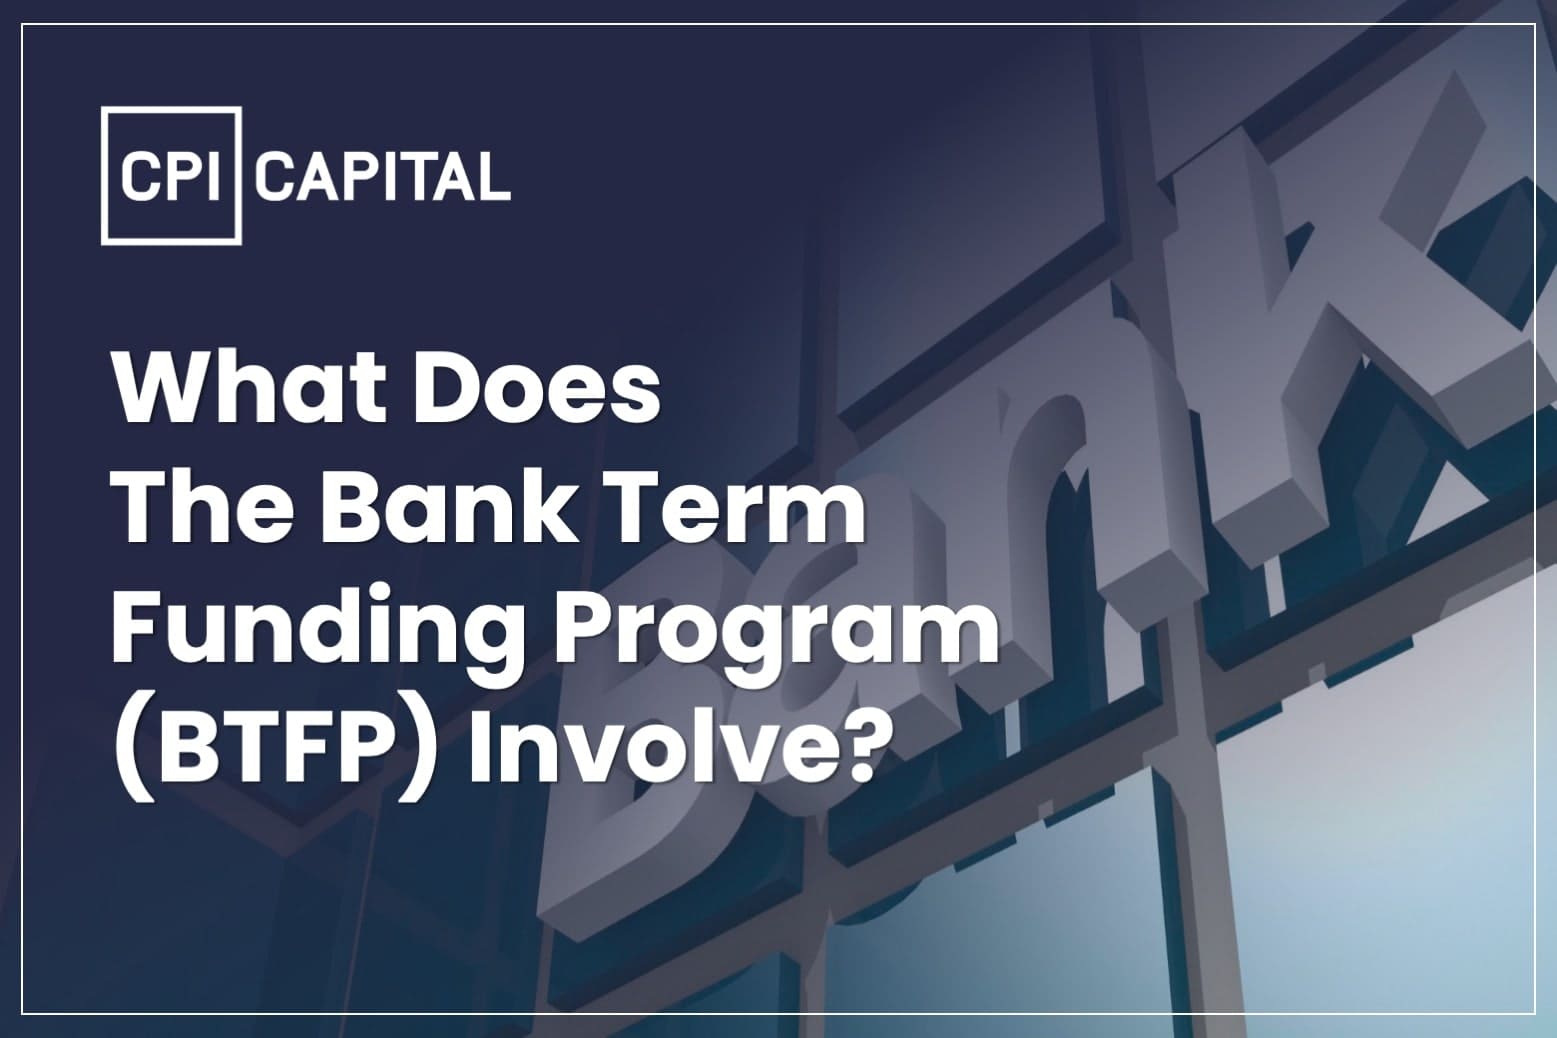 What Does The Bank Term Funding Program (BTFP) Involve?